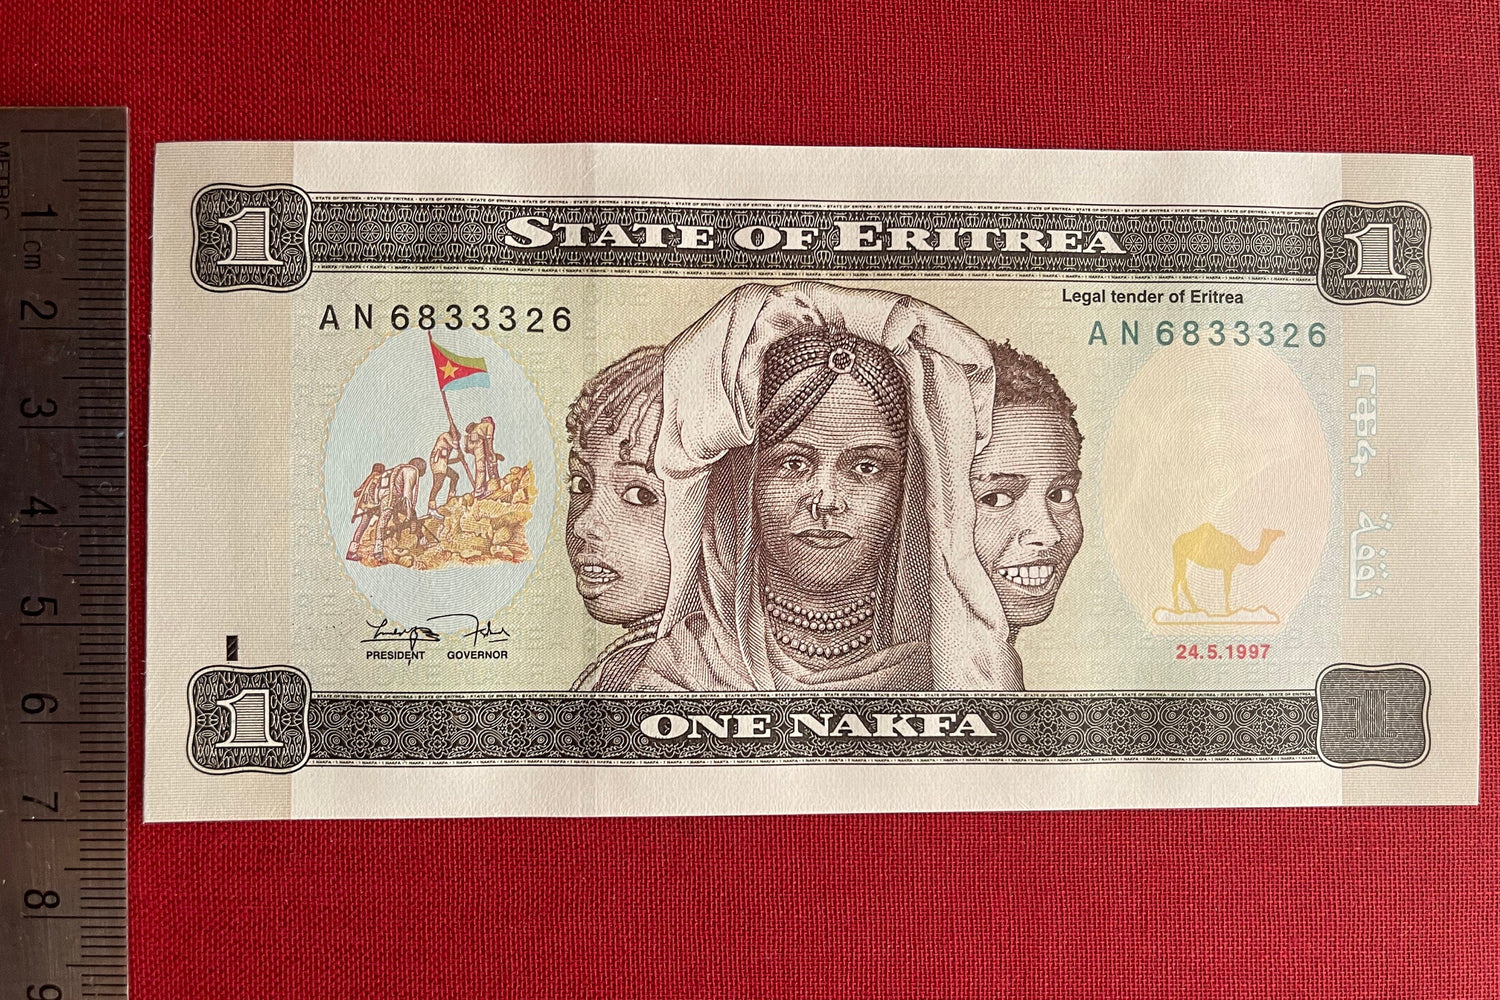 Three Girls & Youth Reading Books 1 Nafka Eritrea Authentic Banknote Money for Jewelry and Collage (Clarence Holbert) (Camel) Black Lives